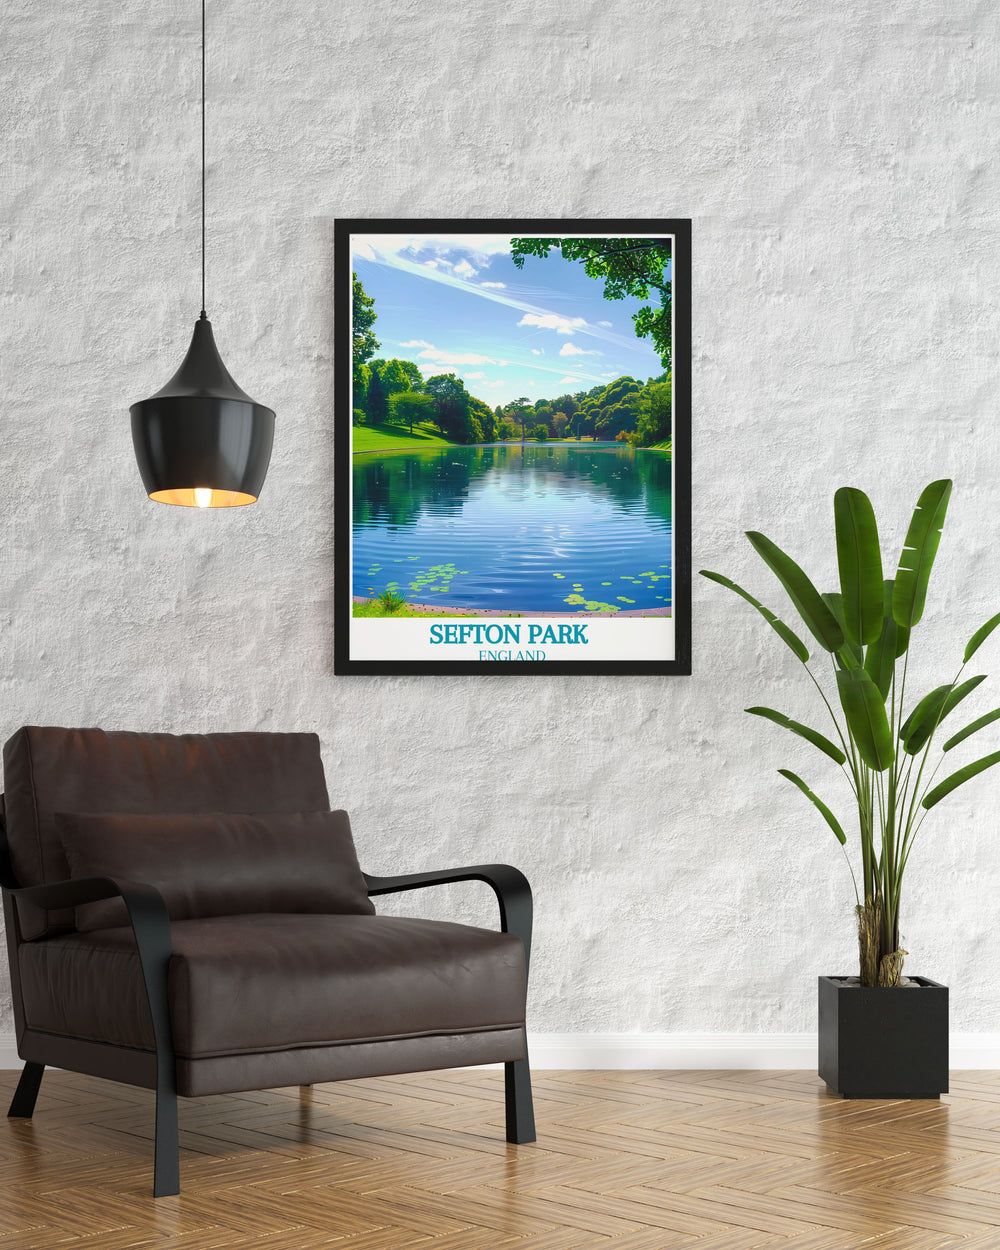 Vintage travel print showcasing Liverpools Sefton Park Lake and the historic Sefton Palm House. This wall art beautifully combines the tranquility of nature with architectural elegance, ideal for adding a touch of charm to any room.